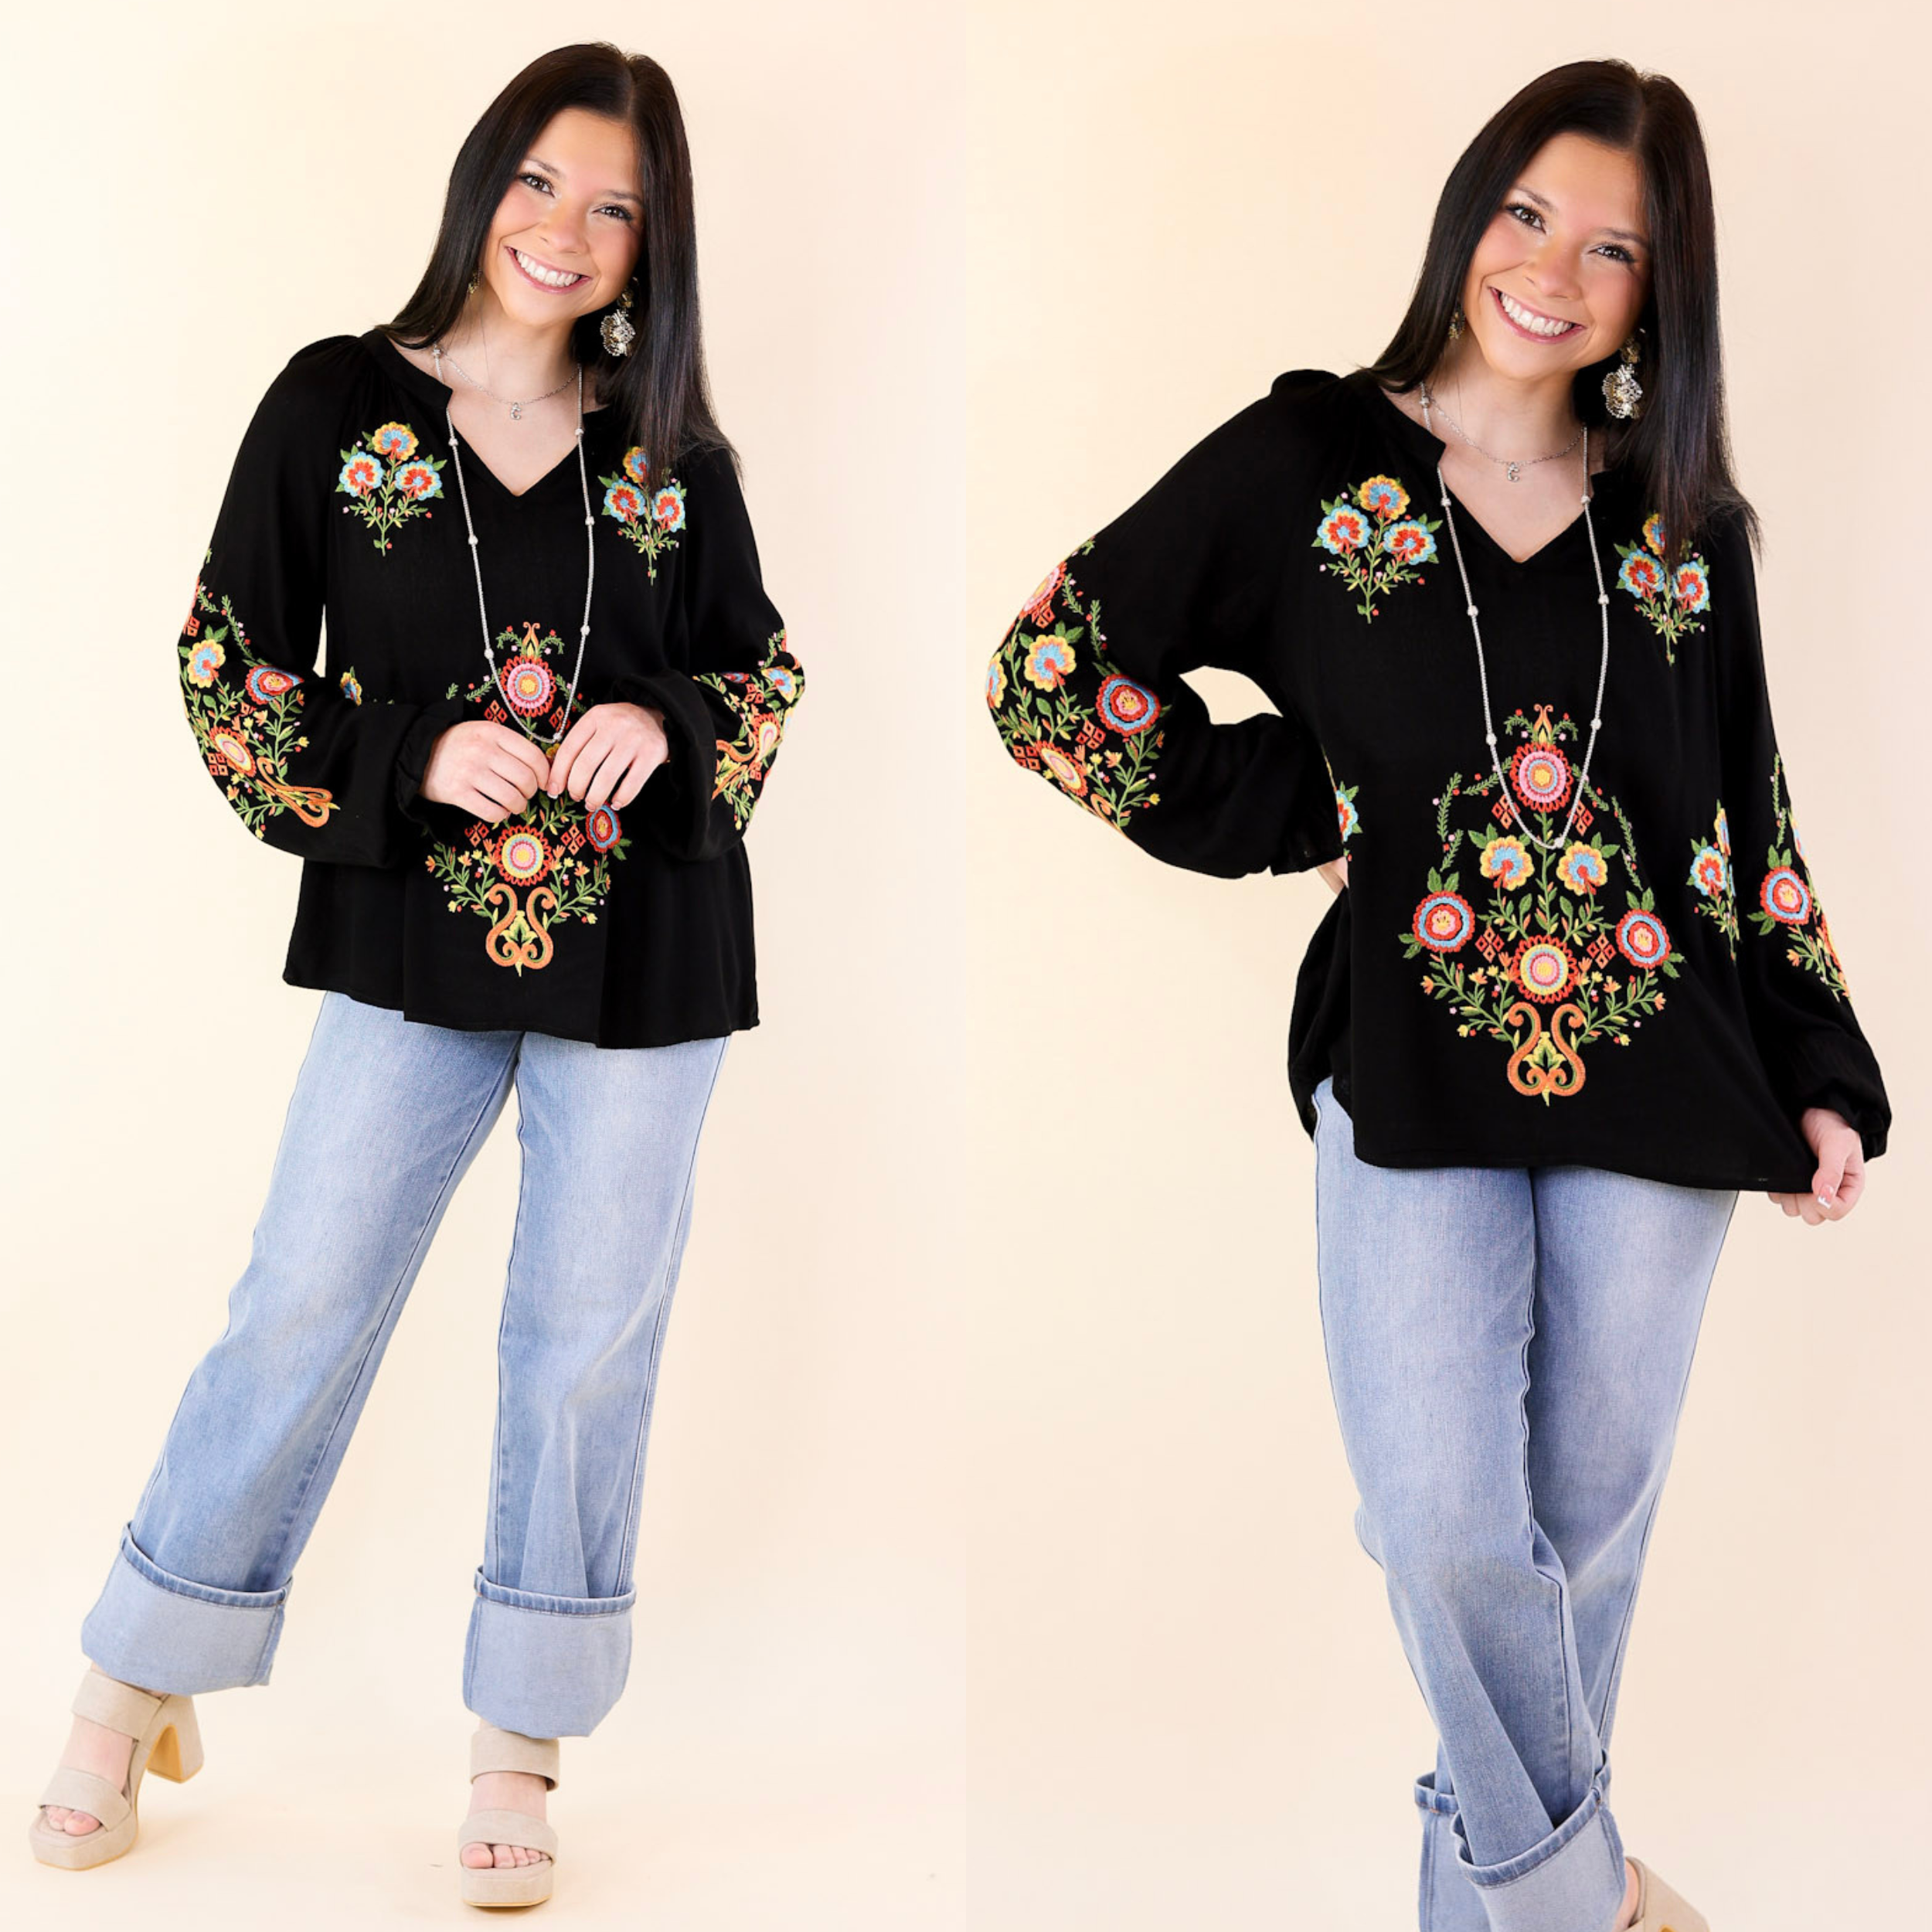 Dreamy Destination Floral Embroidered Long Sleeve Top in Black